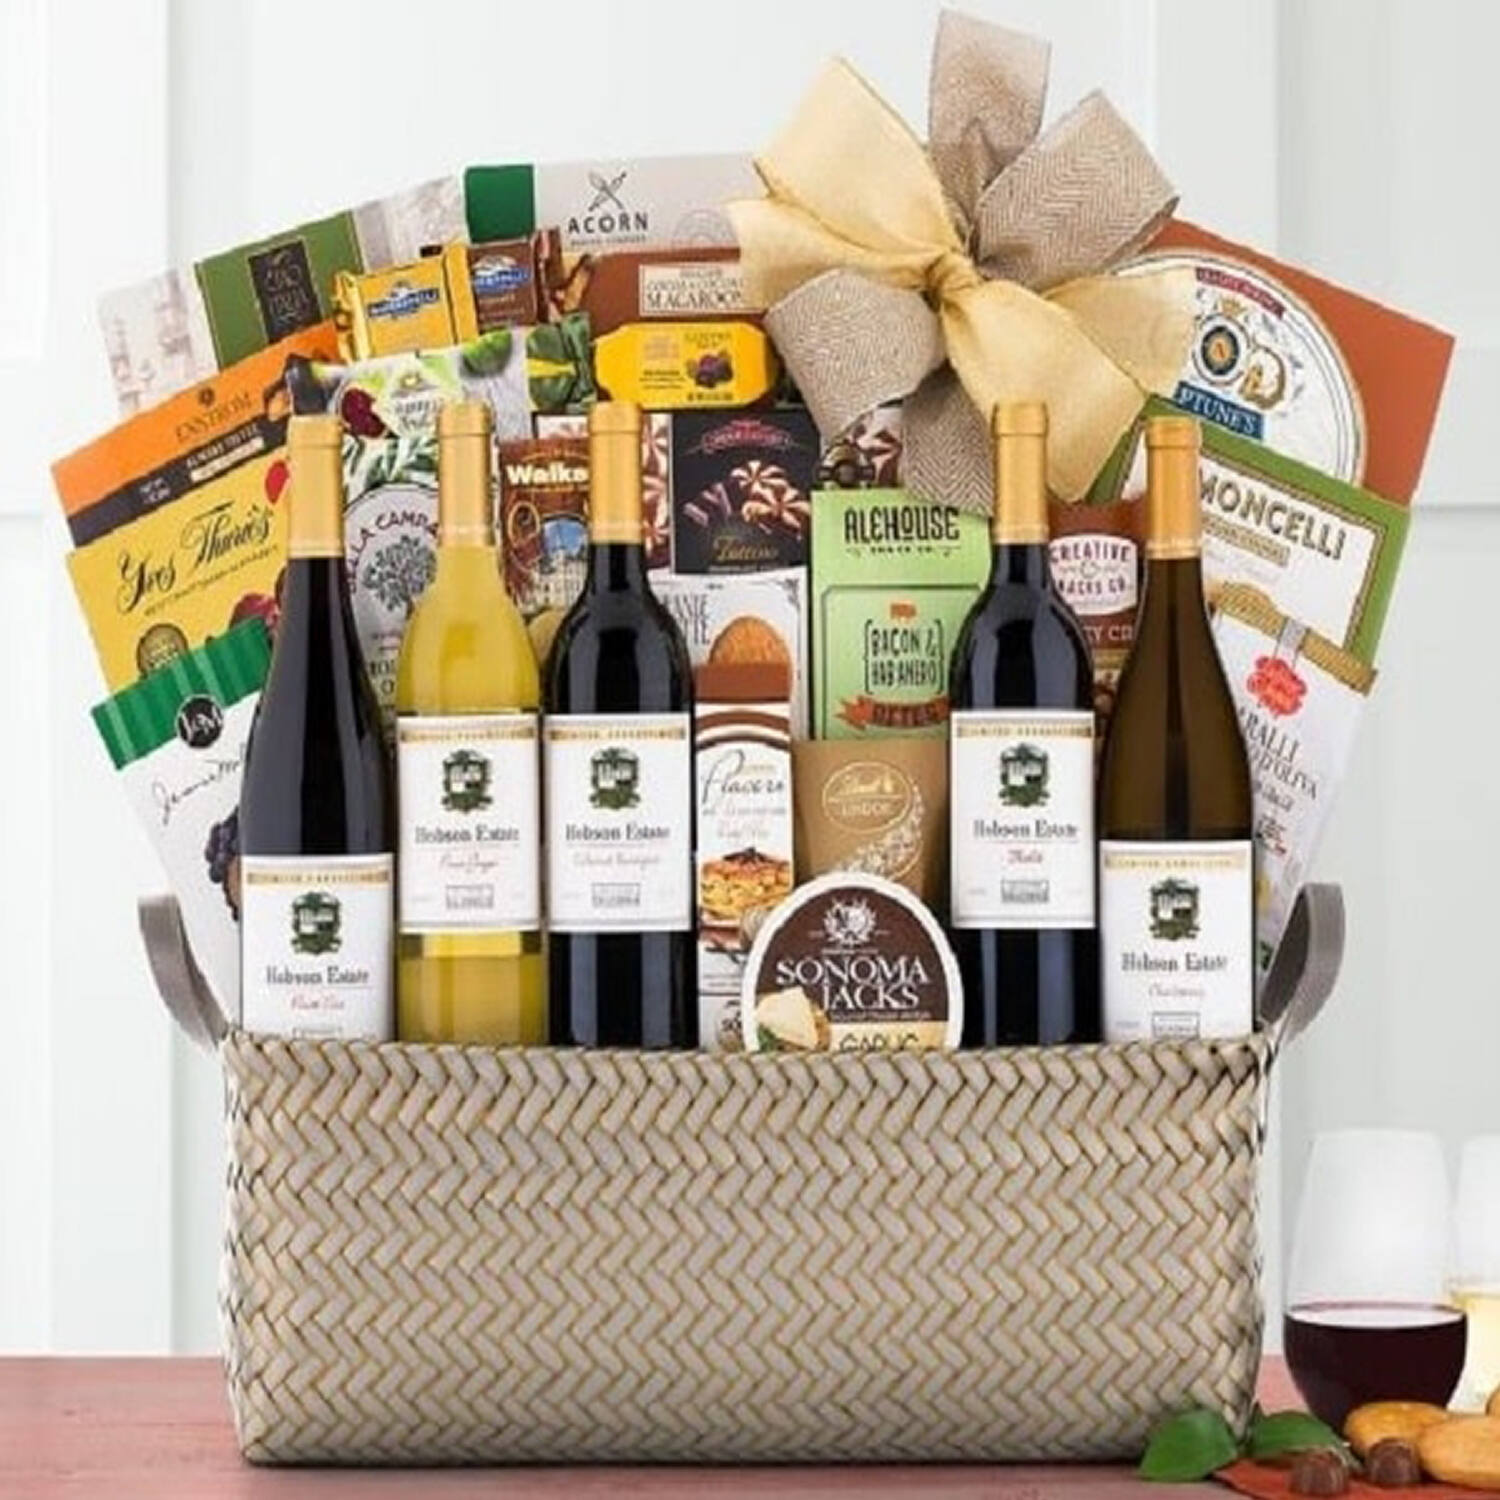 Buy our warm wishes wine gift basket at broadwaybasketeers.com